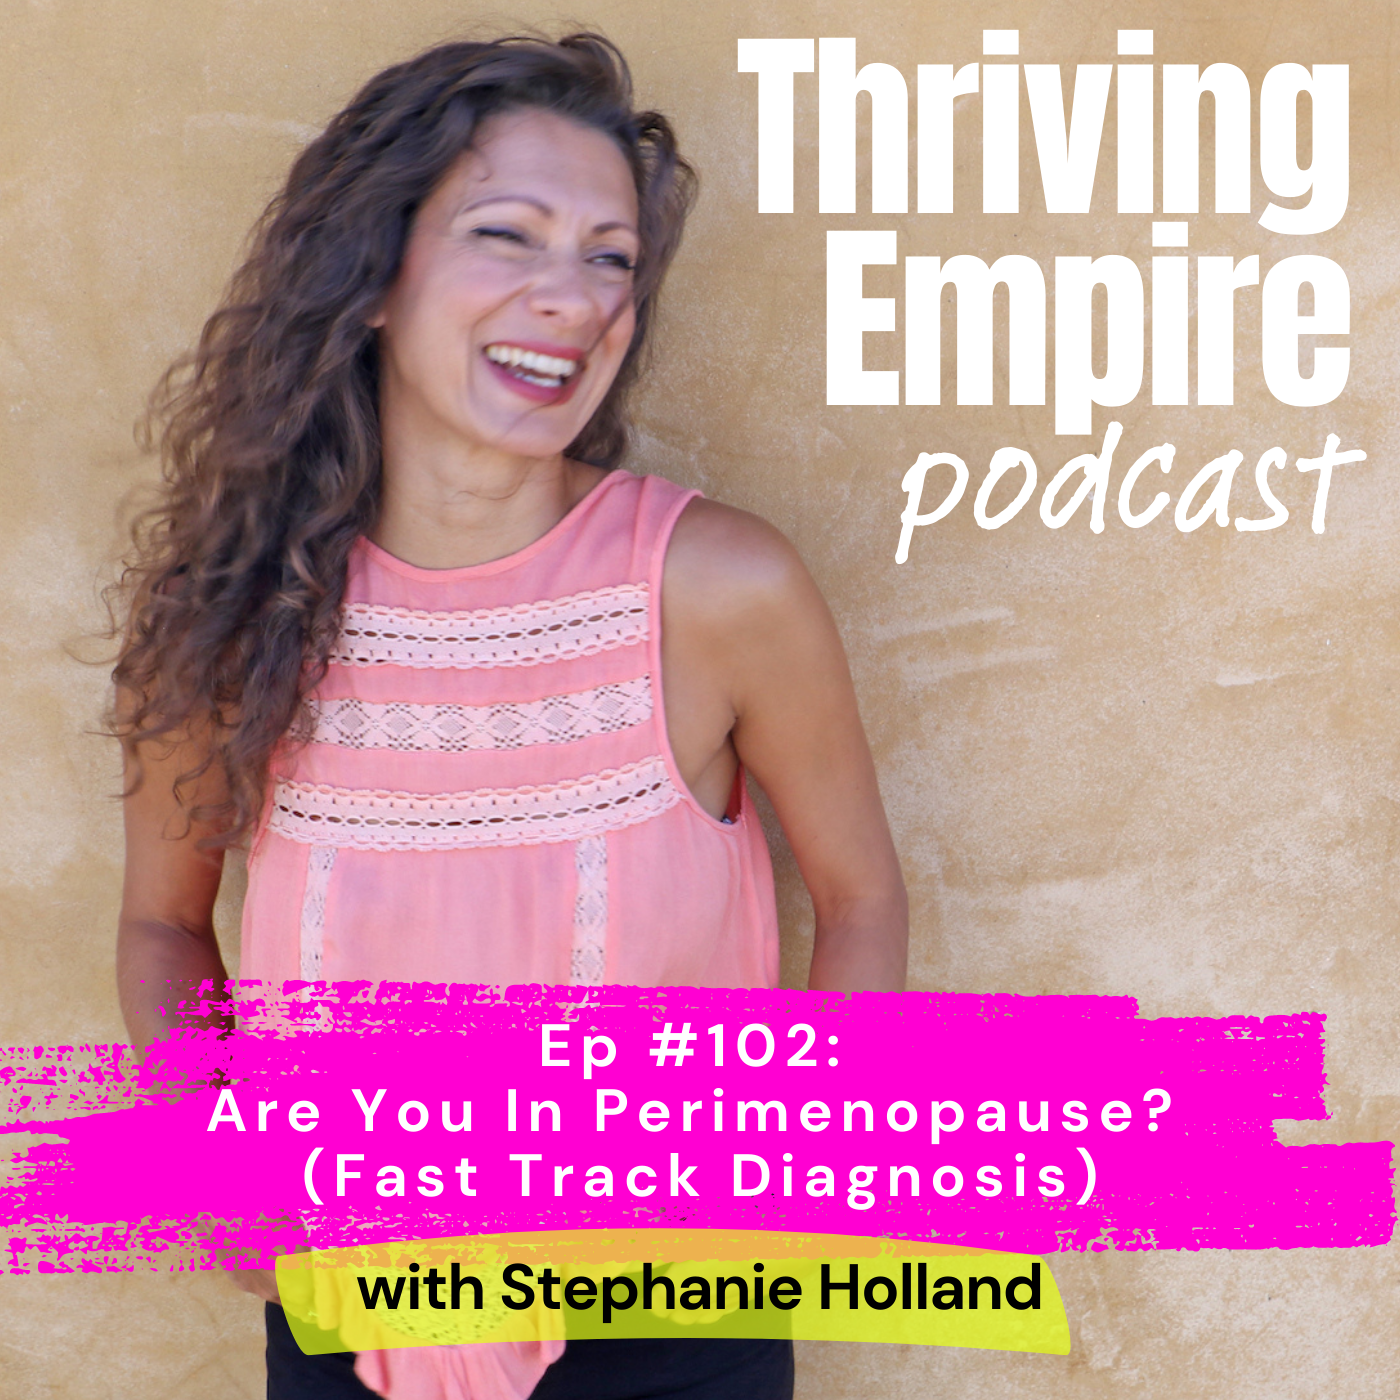 Ep #102: Are You In Perimenopause? (Fast Track Diagnosis)